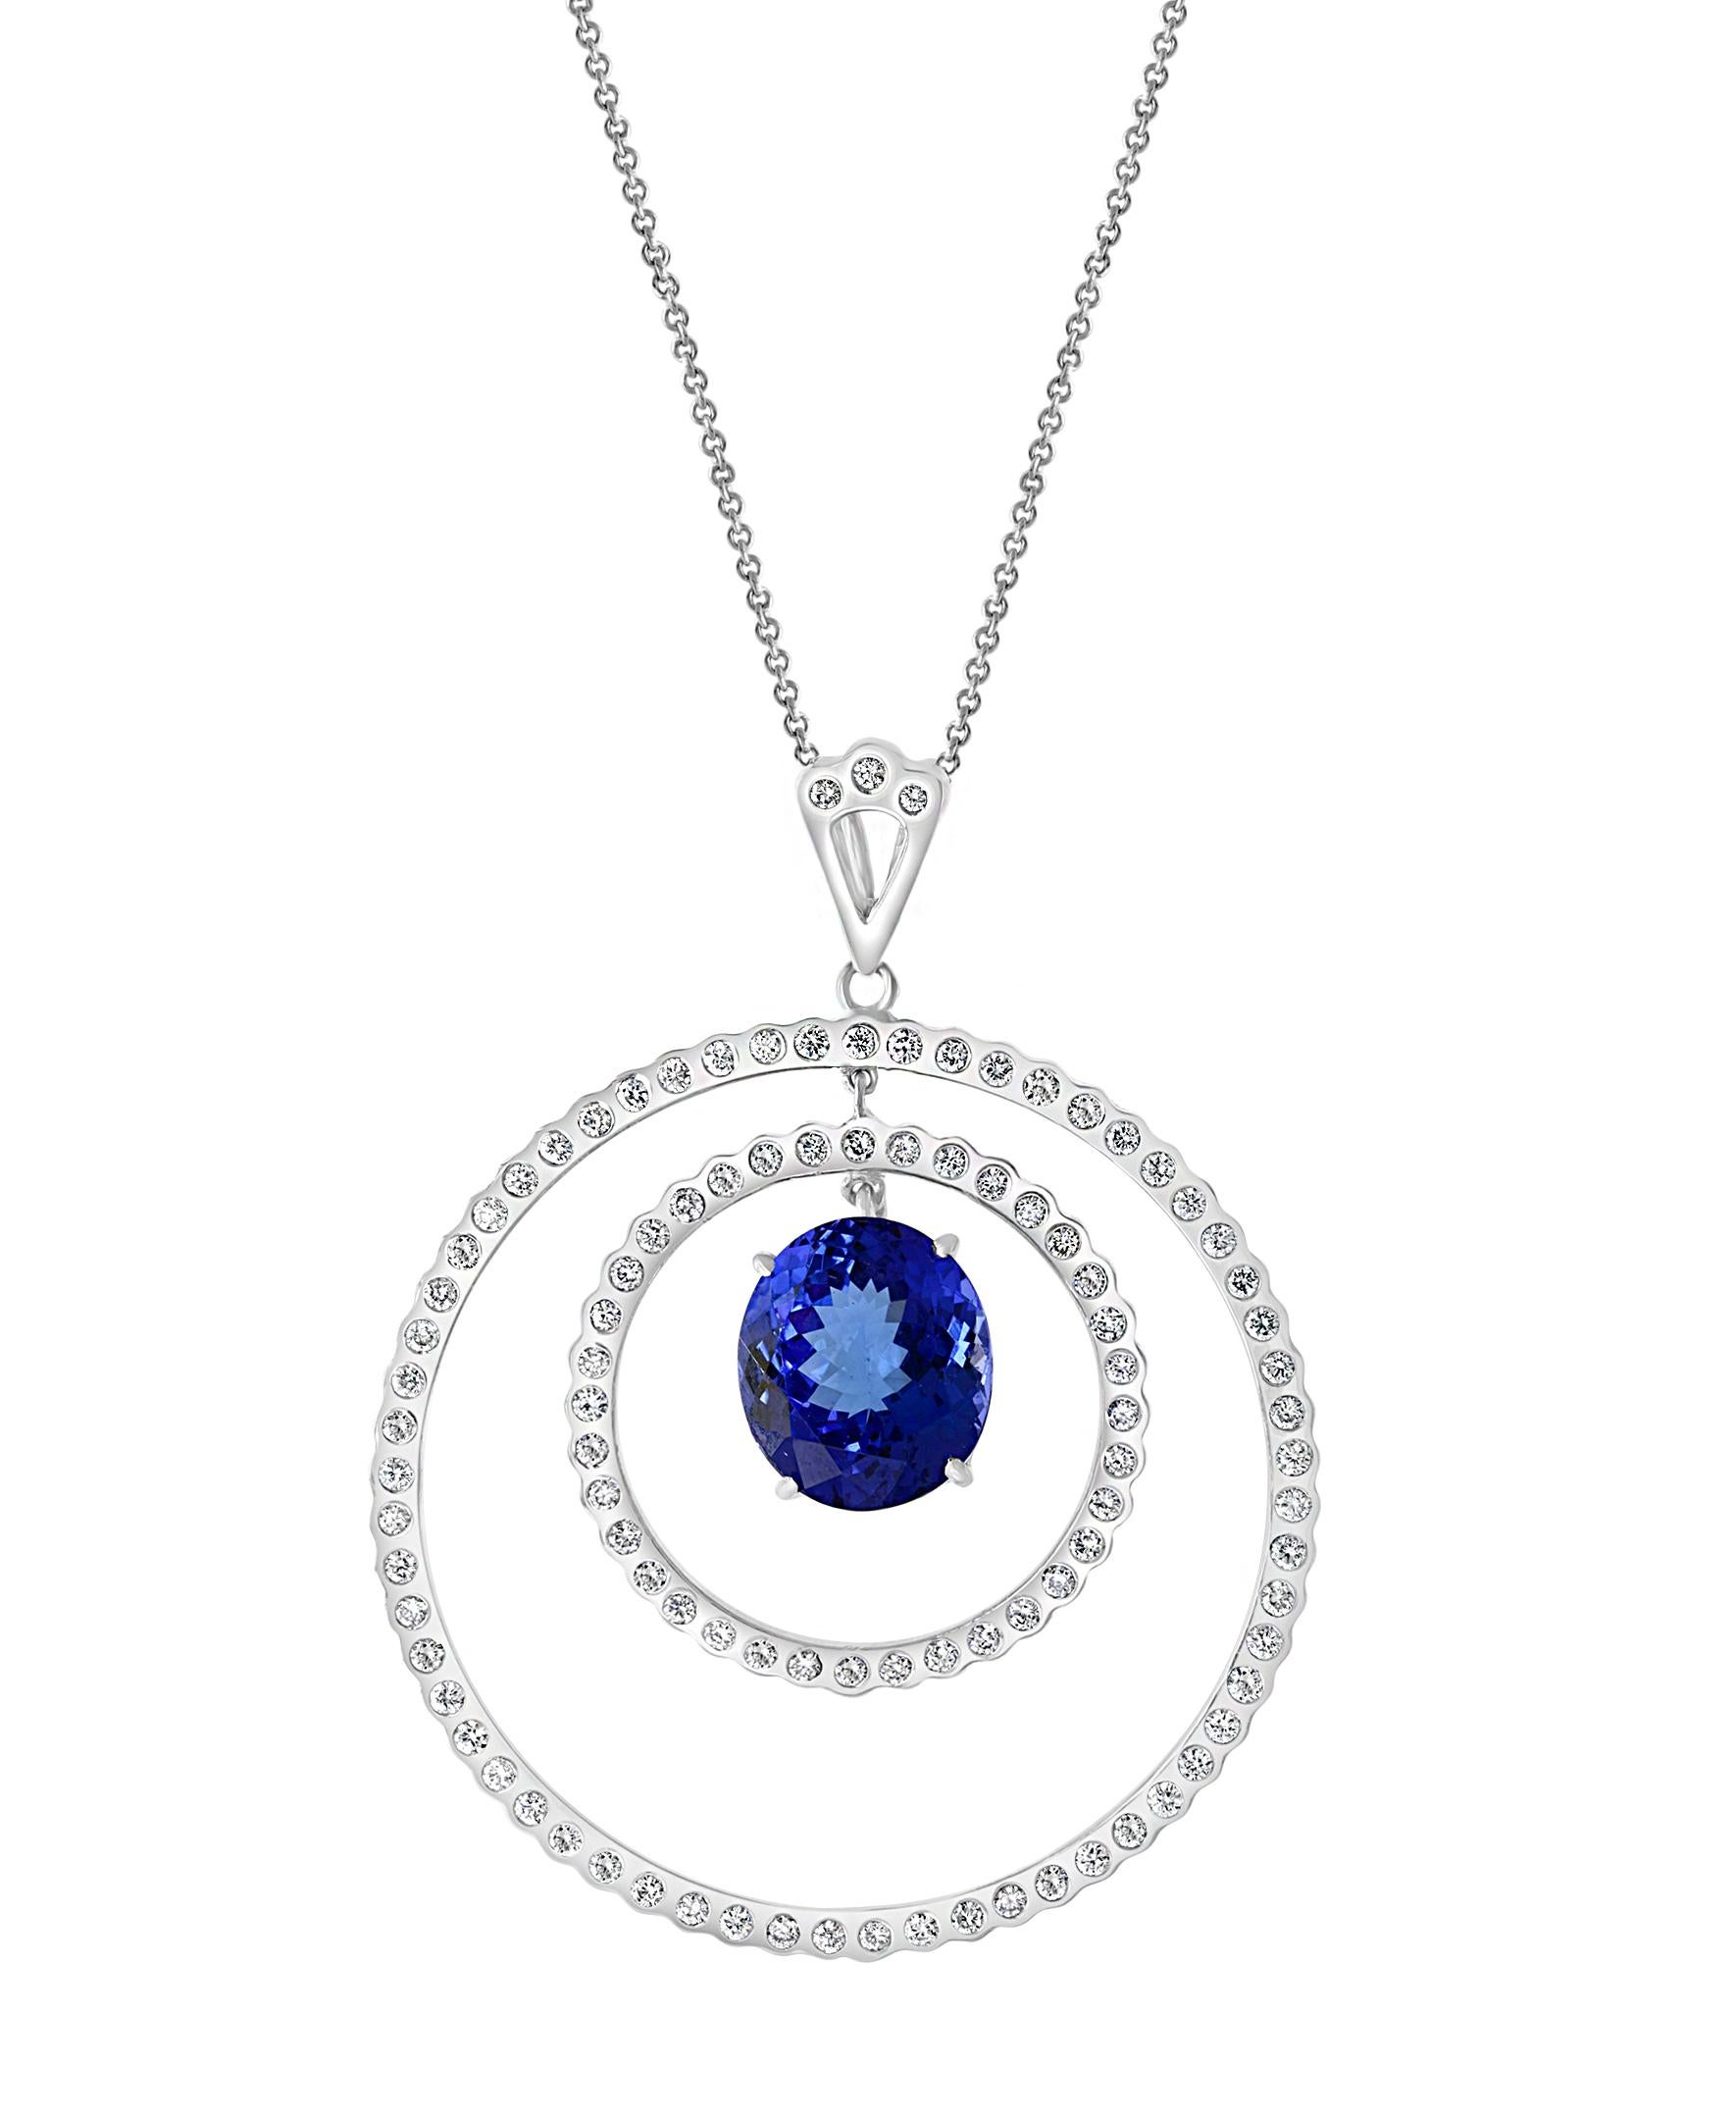 6.7 Ct Tanzanite & 2.5 Ct Diamond Two Circles Pendant/ Necklace 18 K White Gold
Tanzanite Weight  approximately 6.7  Carats
Diamond Weight  approximately 2.5 Carats
Tanzanite is extremely fine quality and color, AAA grade of Tanzanite with beautiful